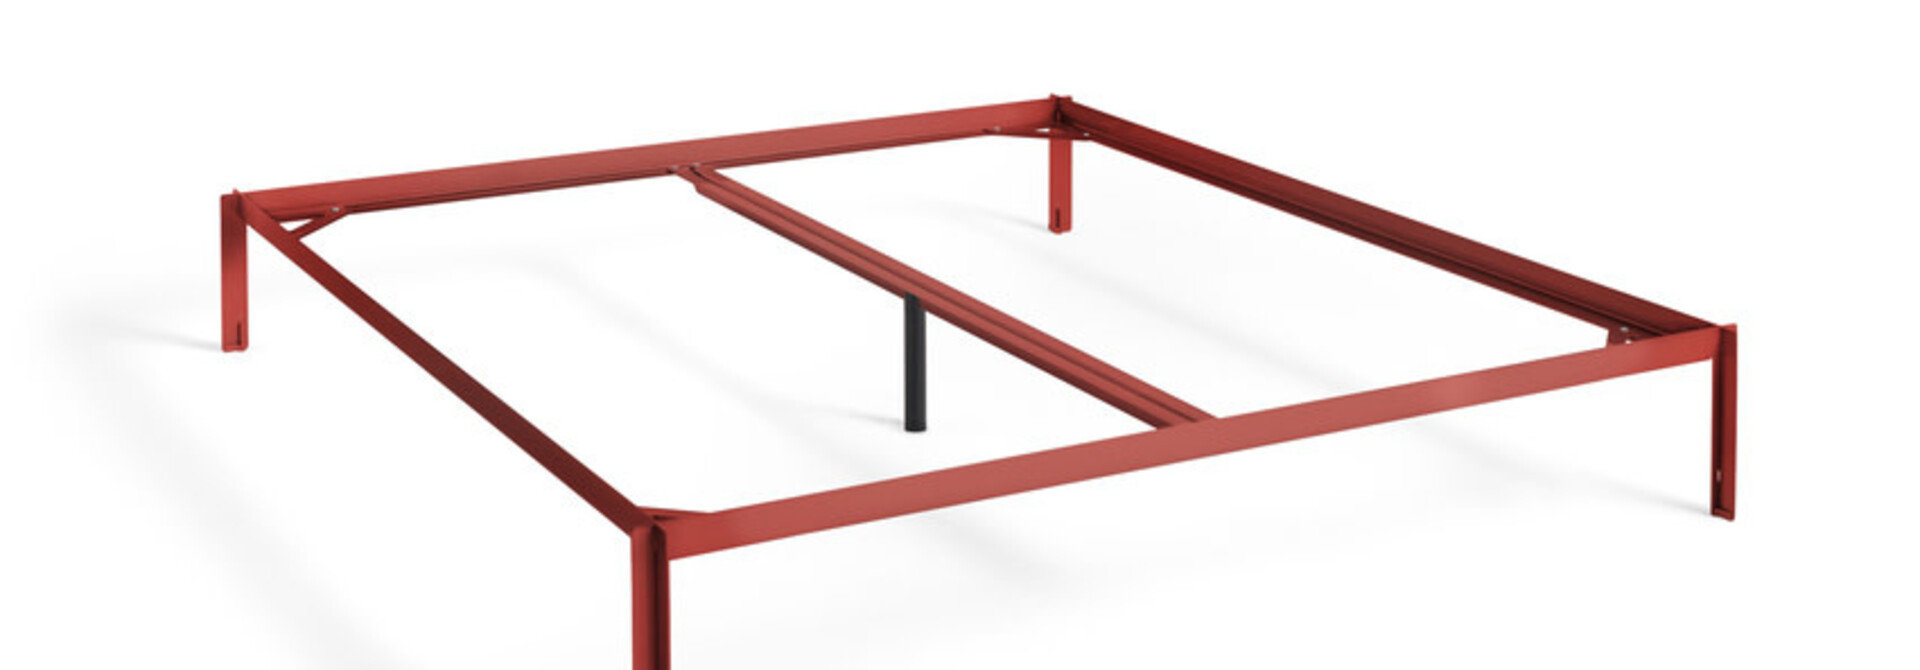 Connect Bed Frame 180x200cm